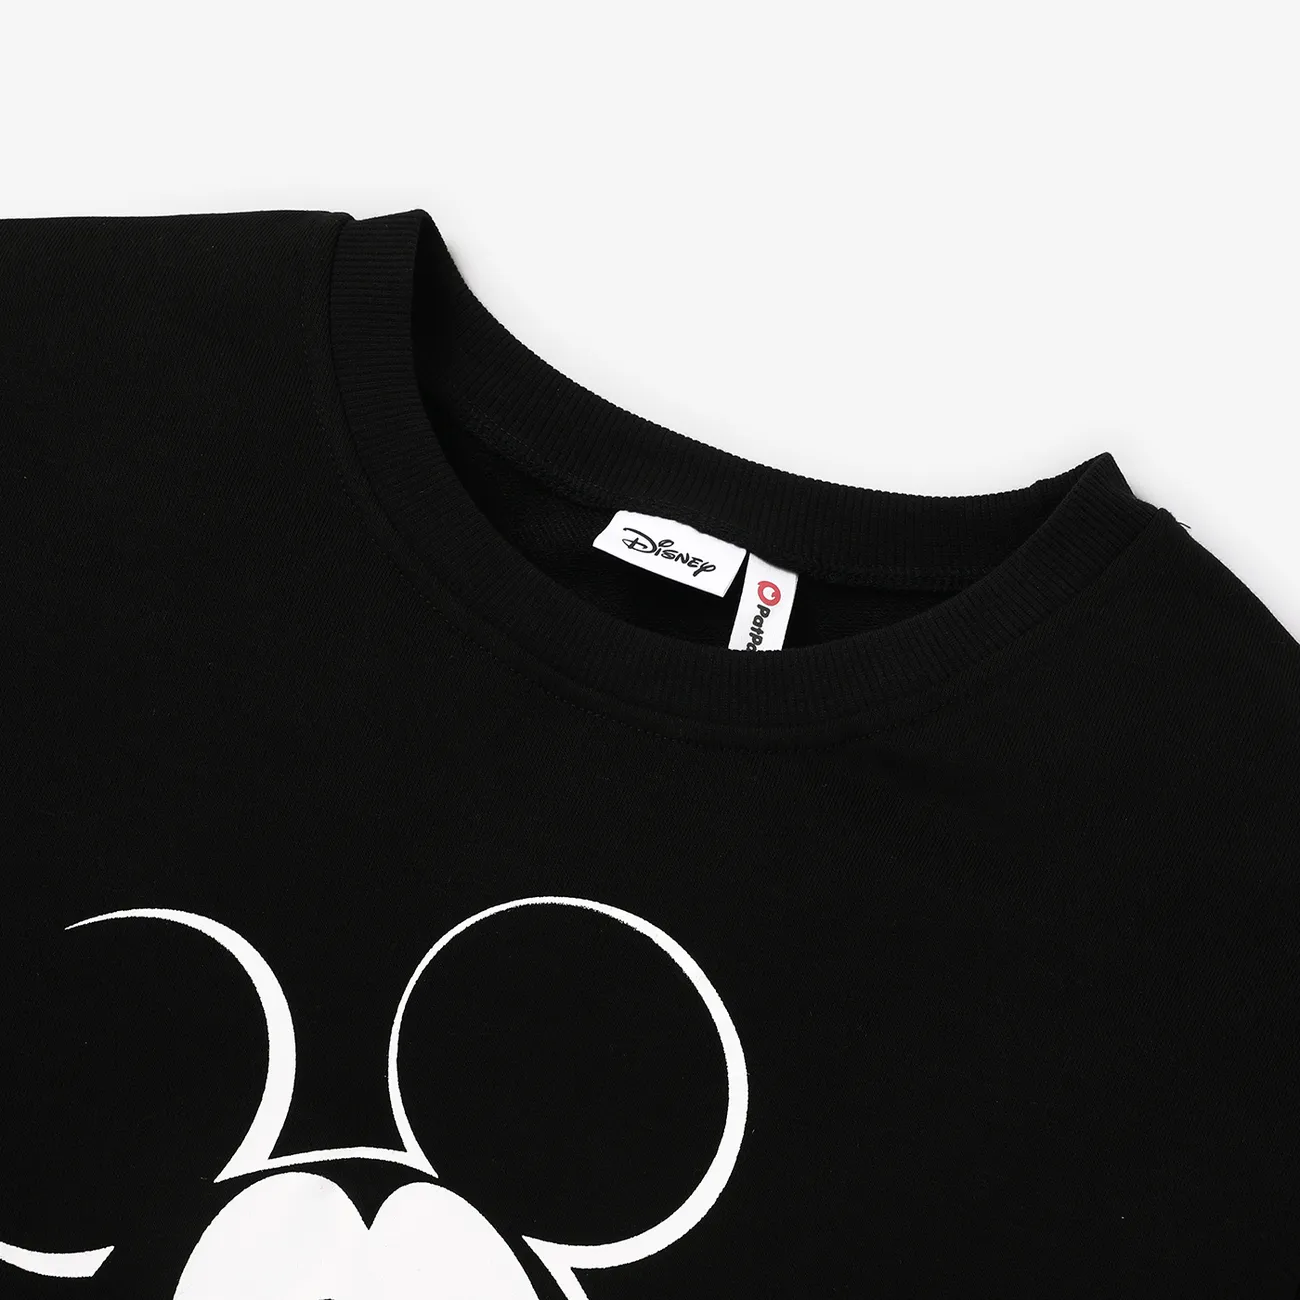 Disney Mickey and Minnie Halloween Family Matching Character Pattern Crew Neck Top  Black big image 1